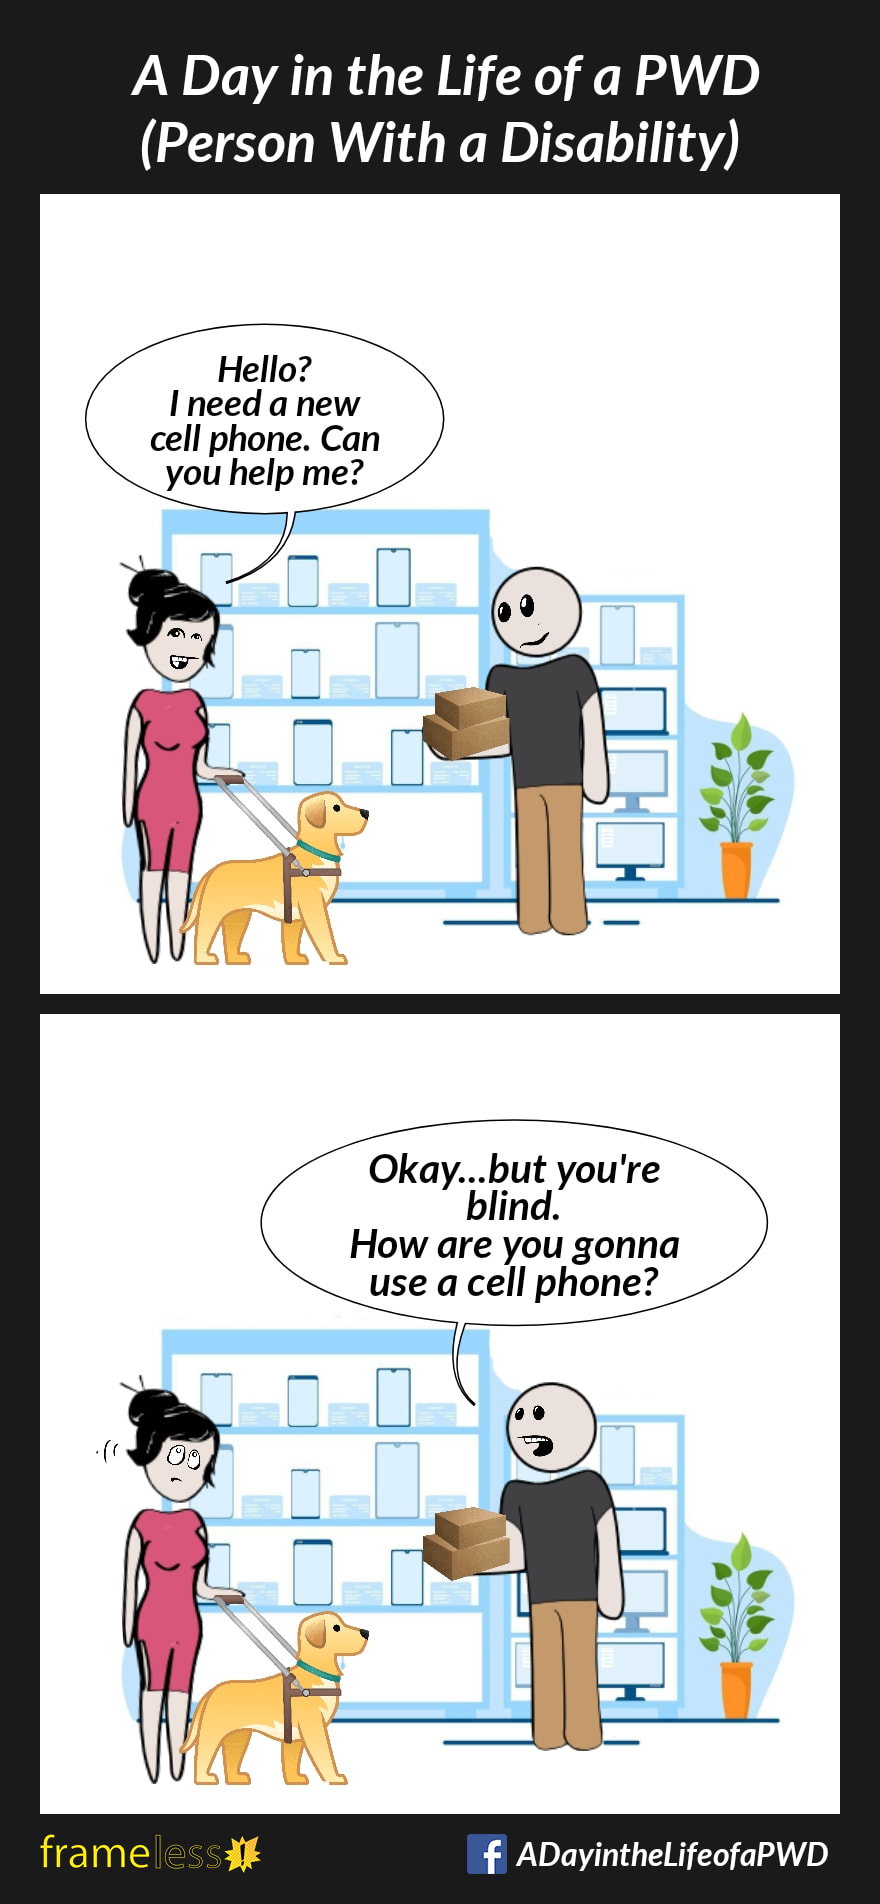 COMIC STRIP 
A Day in the Life of a PWD (Person With a Disability) 

Frame 1:
In a cell phone store, a woman who uses a guide dog encounters a clerk carrying small boxes.
WOMAN: Hello? I need a new cell phone. Can you help me?

Frame 2:
CLERK: Okay...but you're blind. How are you gonna use a cell phone?
The woman rolls her eyes.